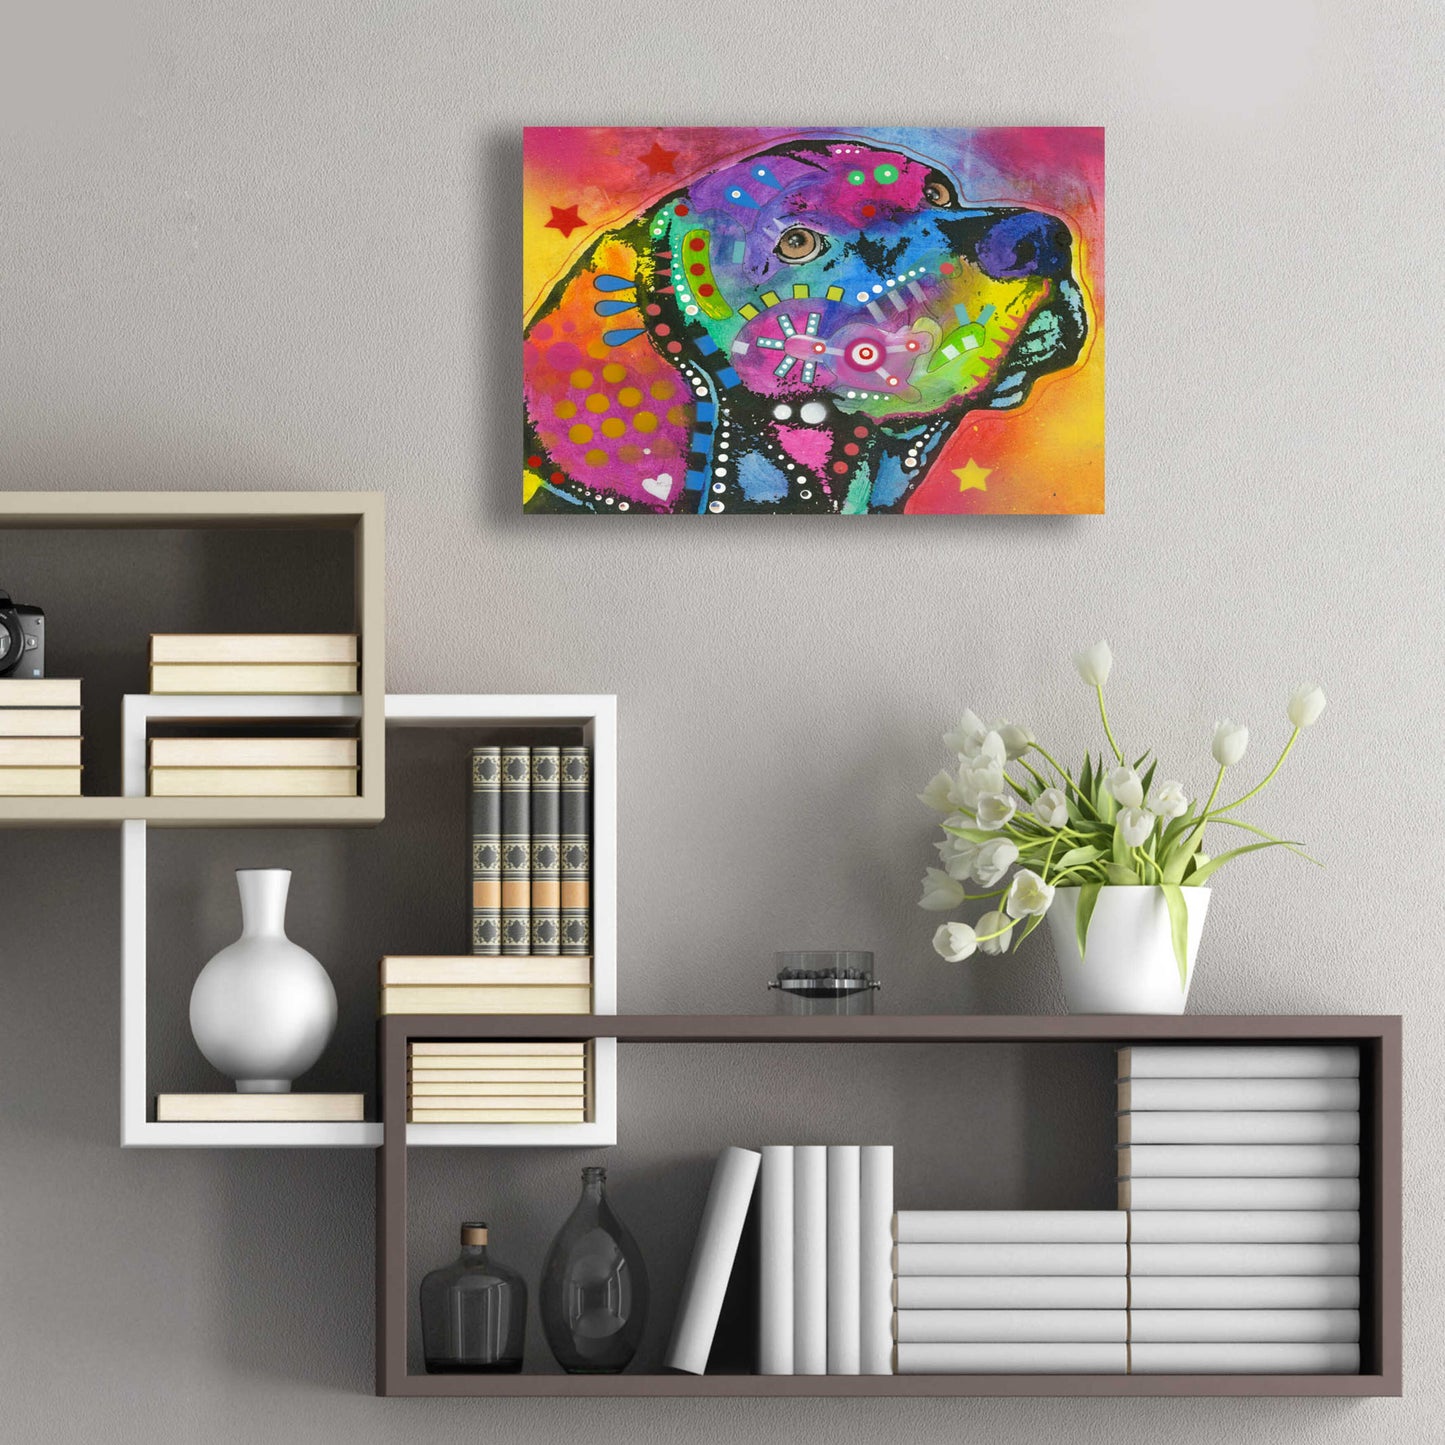 Epic Art 'Psychedelic Lab' by Dean Russo, Acrylic Glass Wall Art,24x16